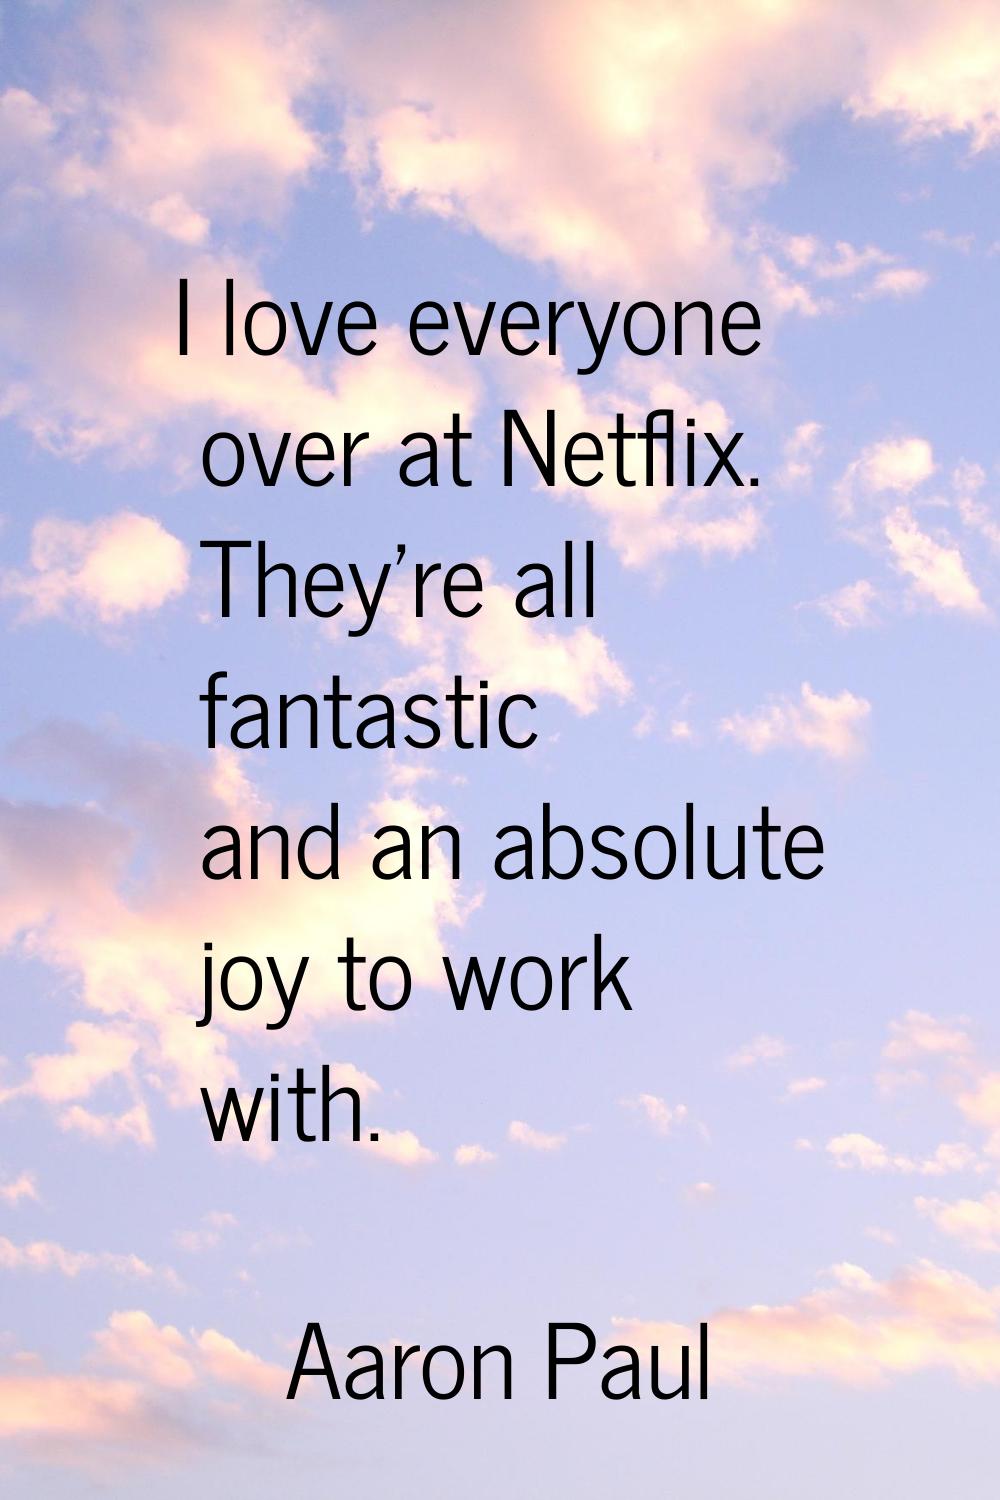 I love everyone over at Netflix. They're all fantastic and an absolute joy to work with.